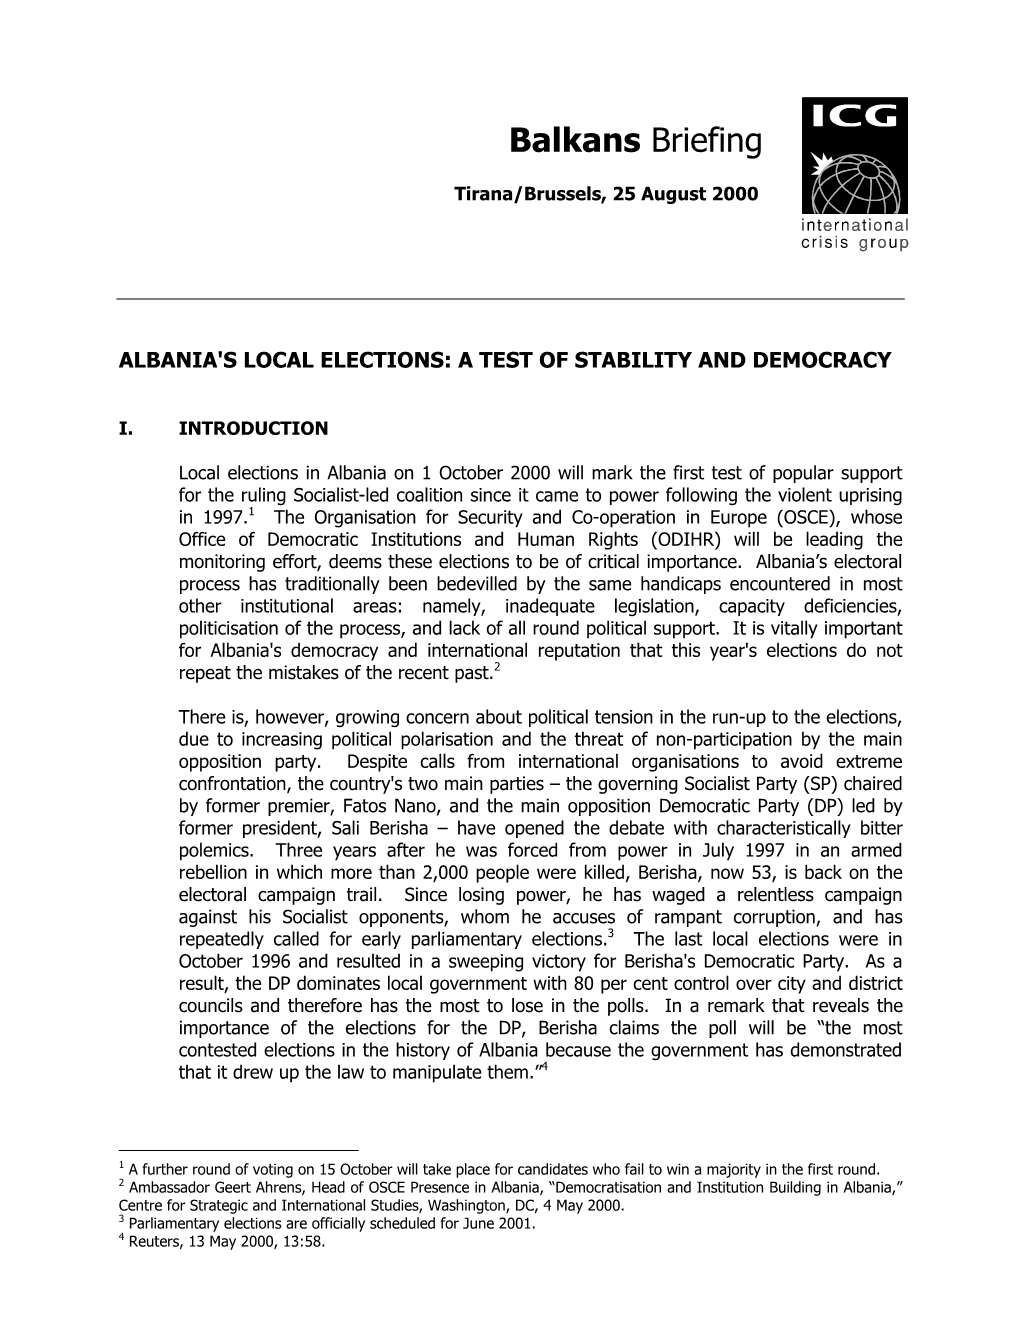 Europe Briefing, Nr. 12: Albania's Local Elections